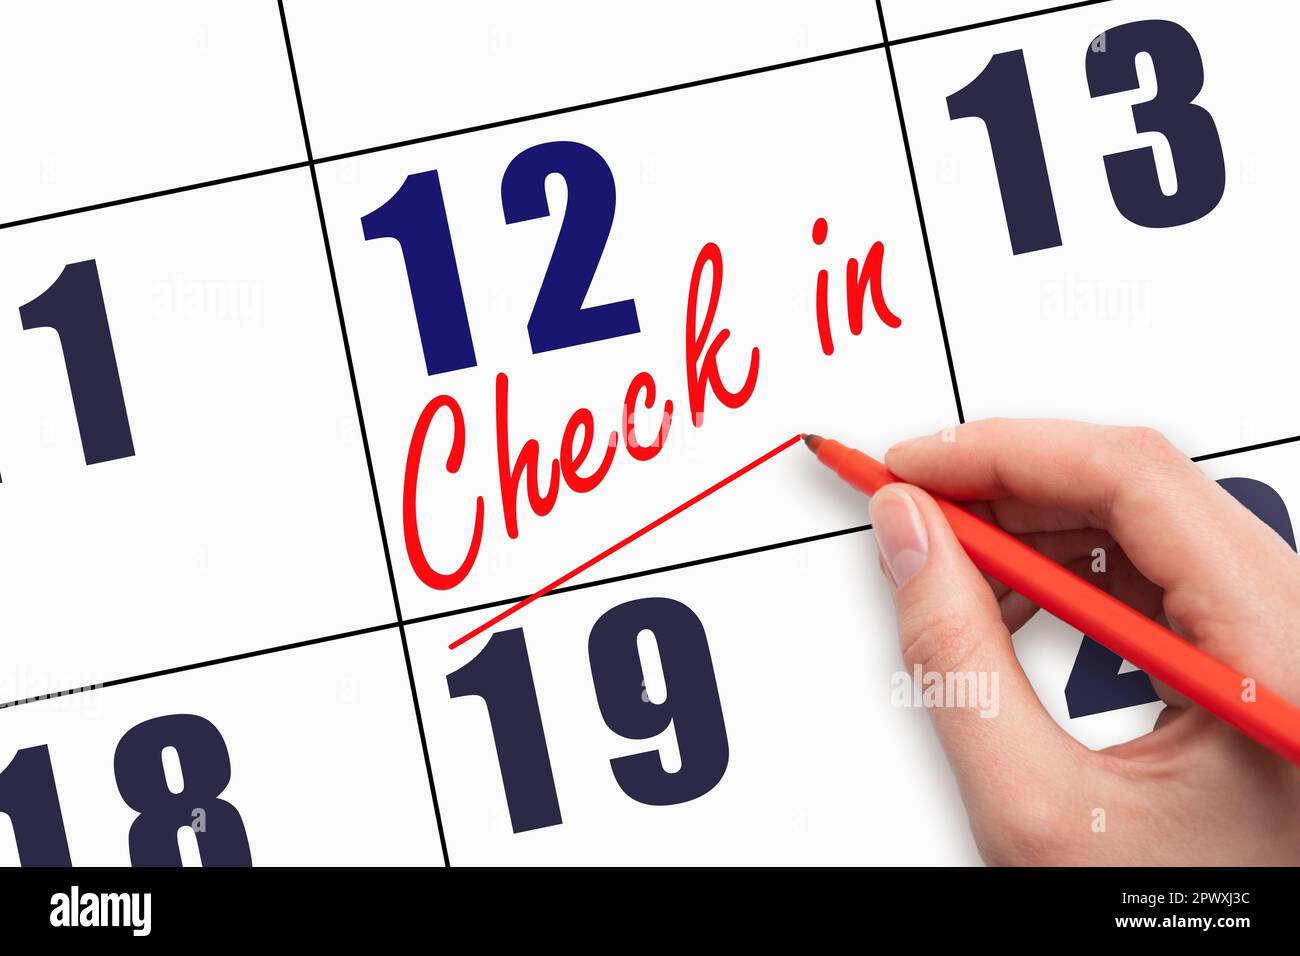 12th day of the month.  Hand writing CHECK IN and drawing a line on calendar date. Business.  Day of the year concept. Stock Photo